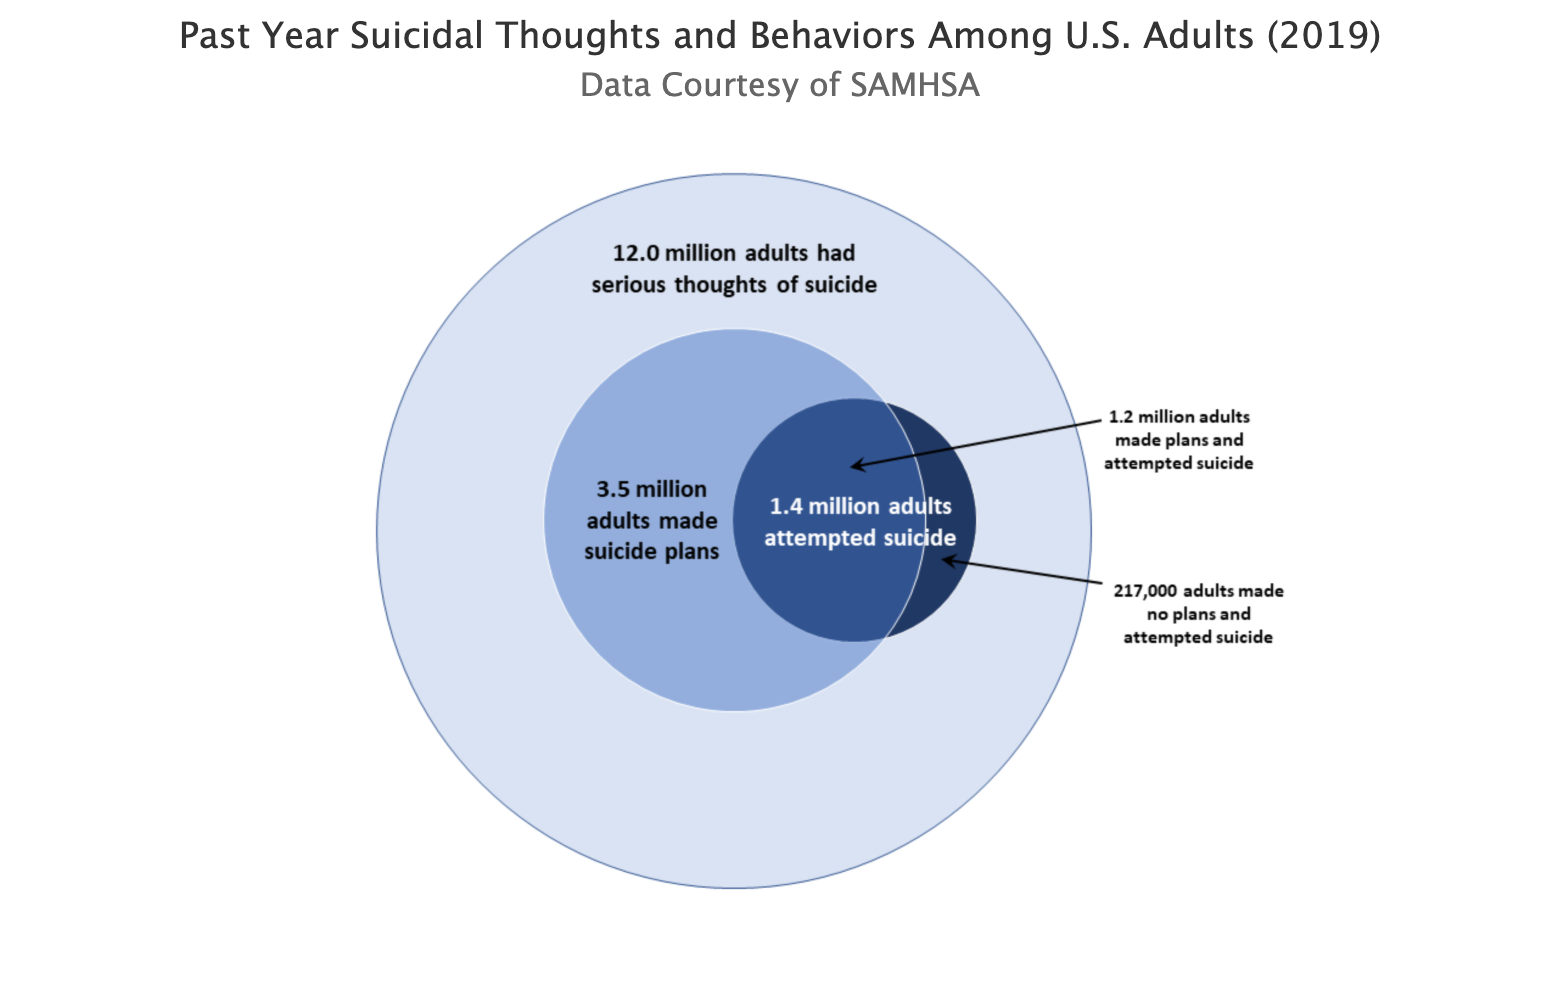 Past year suicidal thoughts and behaviors among U.S. Adults (2019)